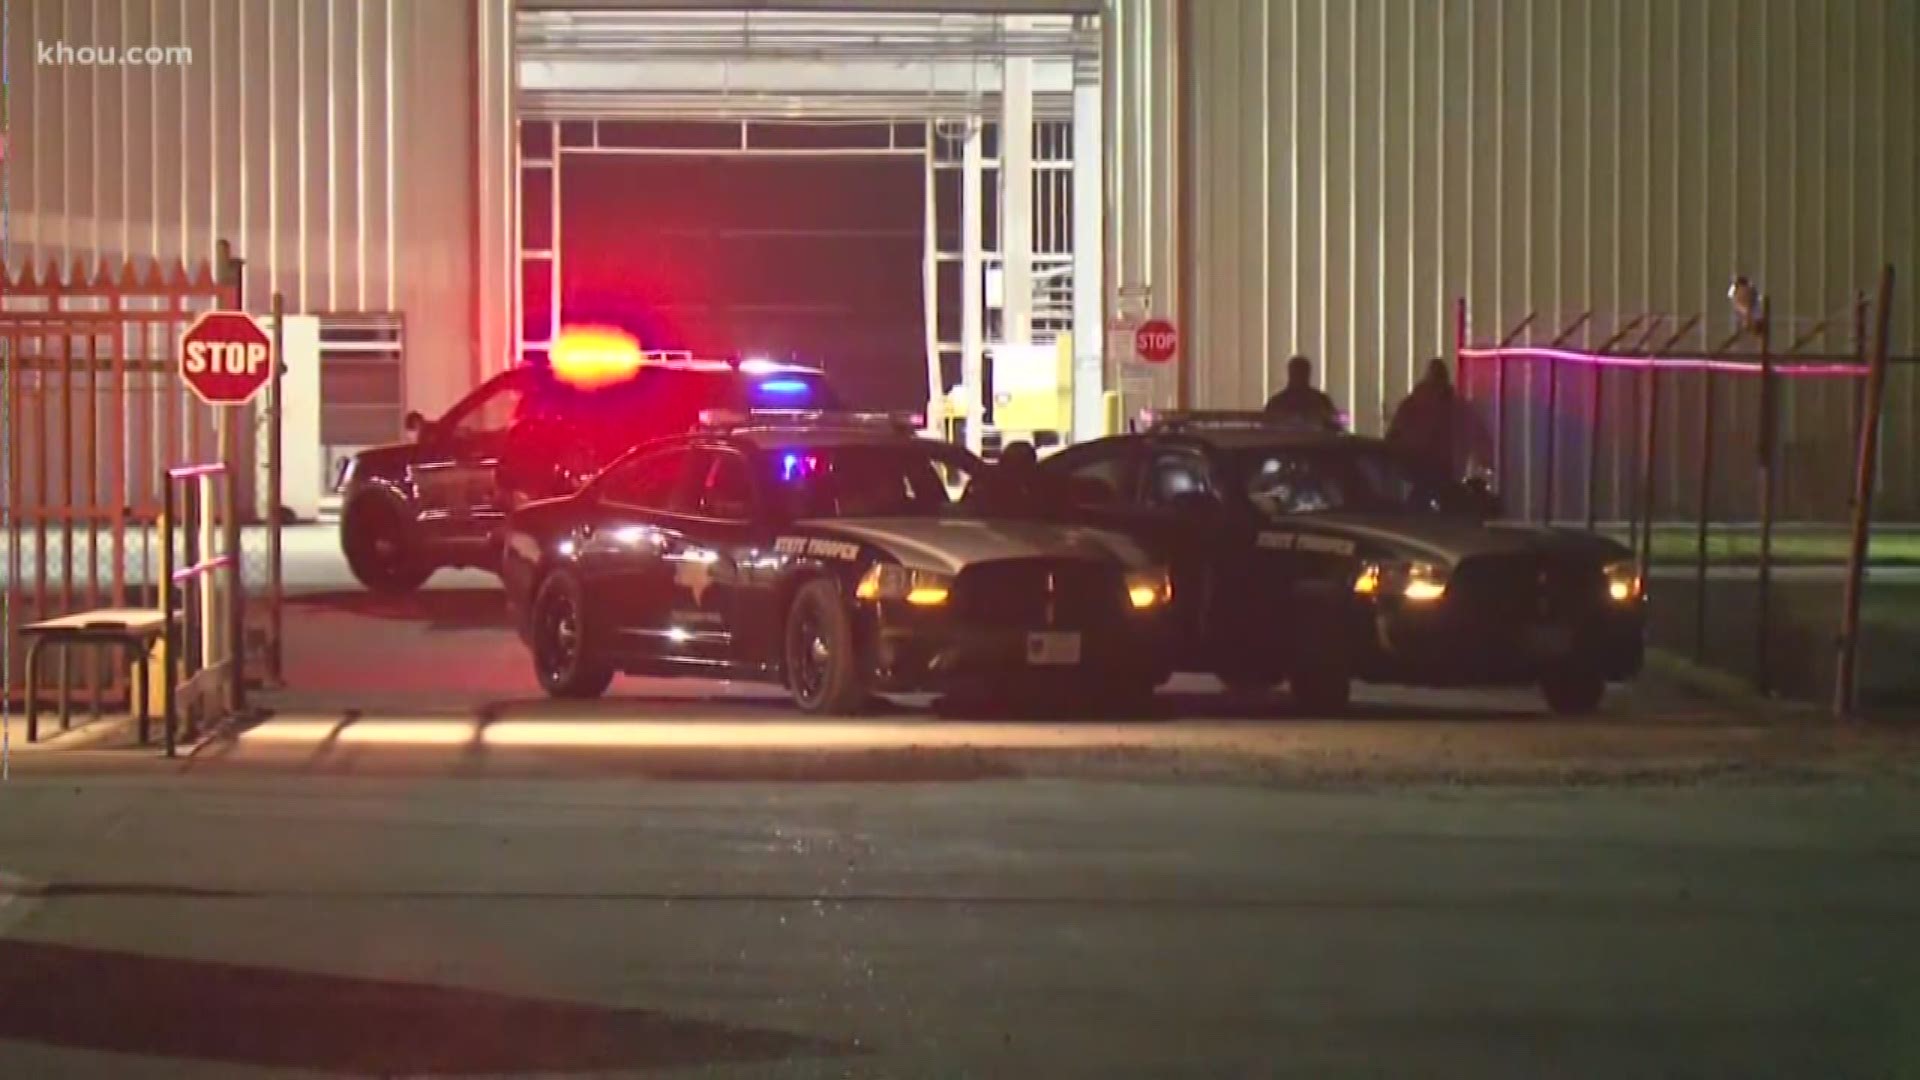 Deputies and State Troopers responded to a fatal stabbing after a report that an employee attacked their boss at a Waller County business Wednesday night.